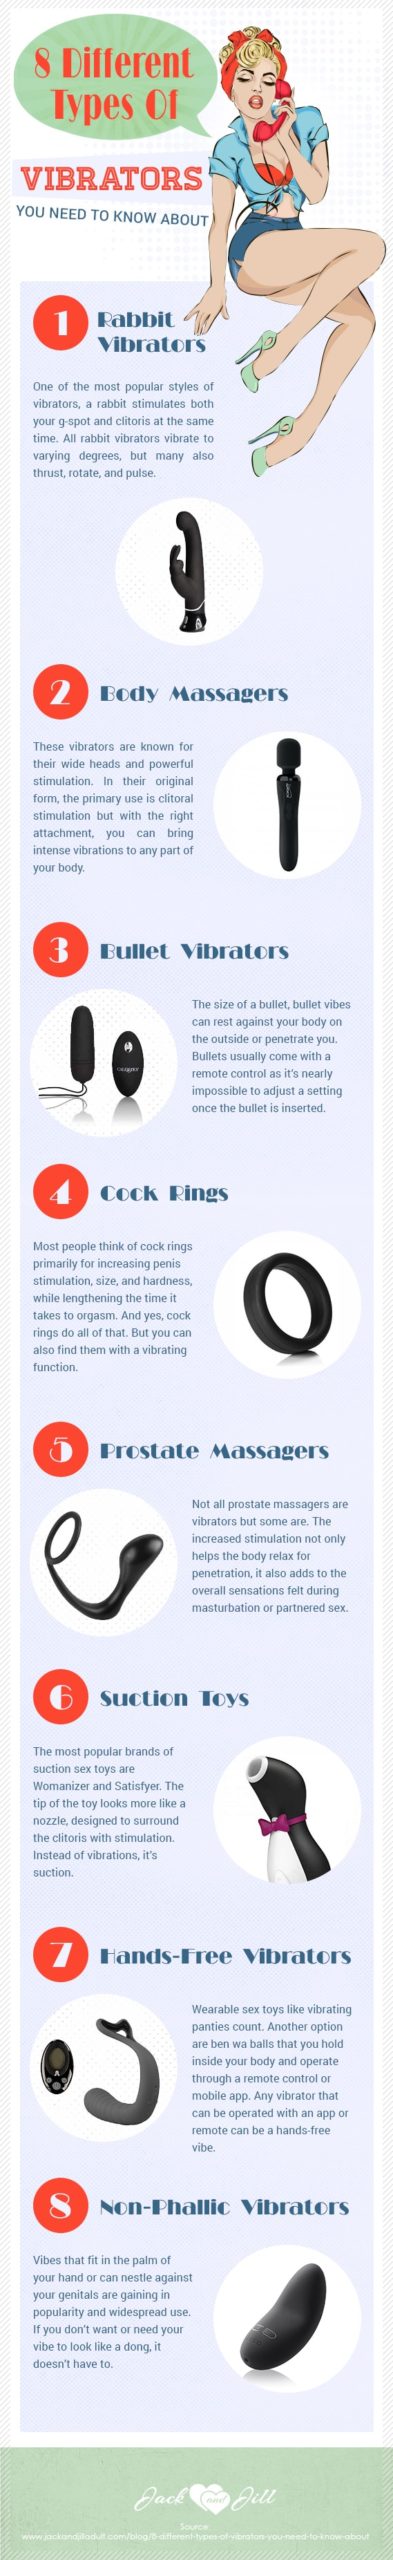 Infographic for 8 Different Types of Vibrators You Need to Know About